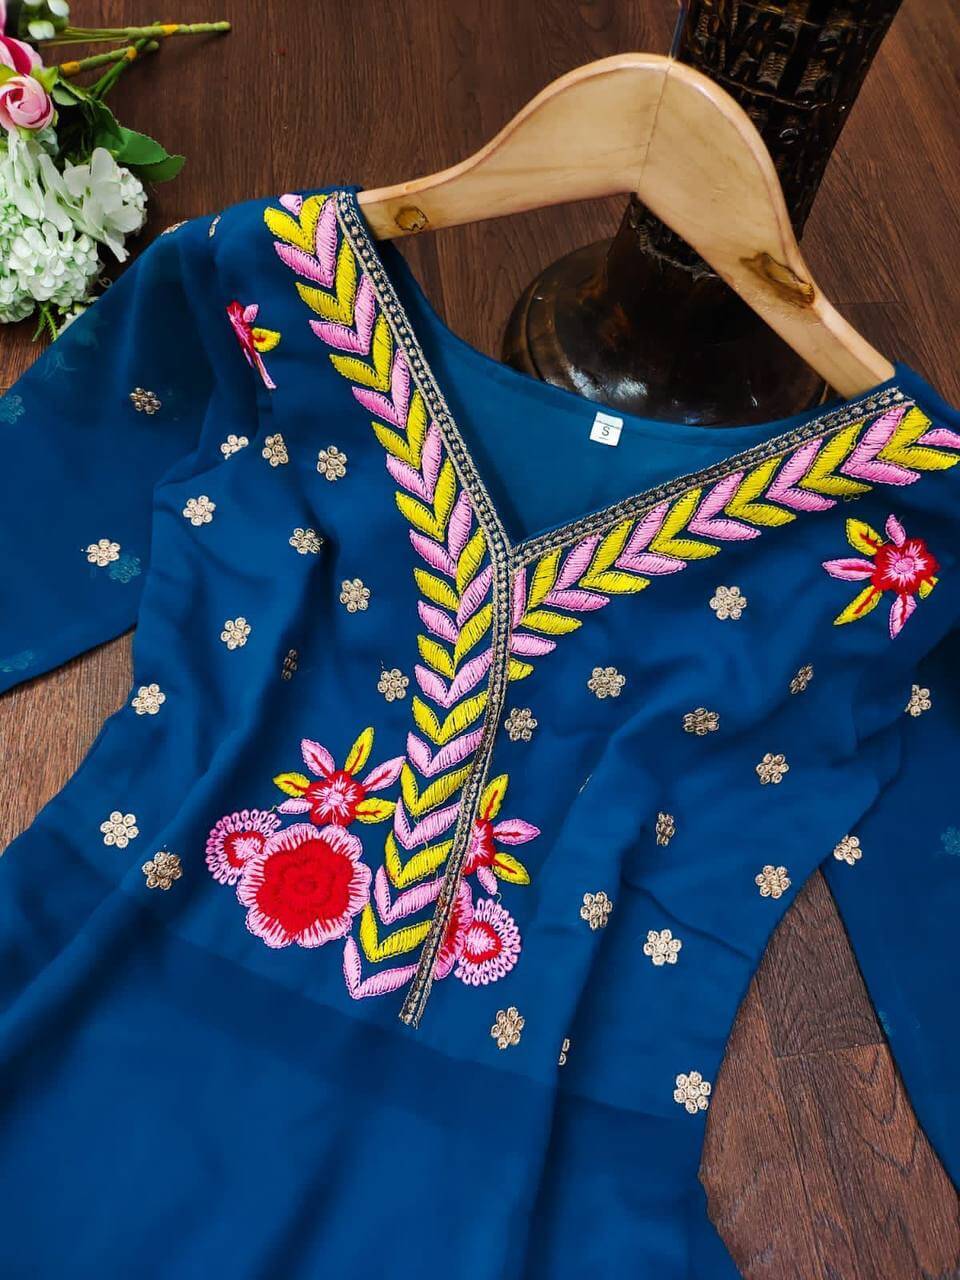 Blue Maxi Dress with Exquisite Embroidery: Elegant Indian Ethnic Attire